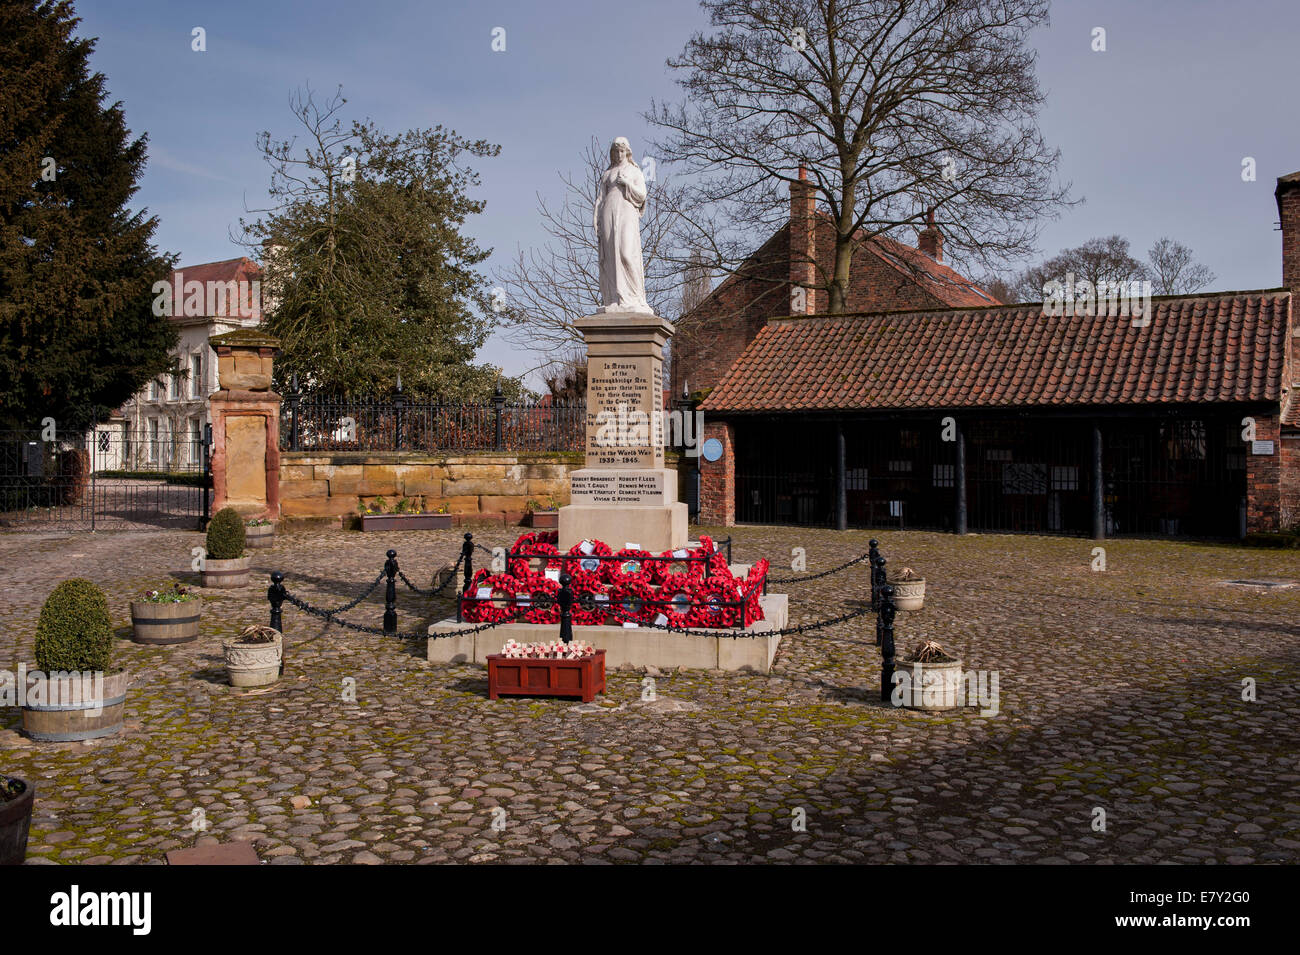 Red poppy wreaths laid at base of war memorial in centre of attractive rural town - cobbled Hall Square, Boroughbridge, North Yorkshire, England, UK. Stock Photo